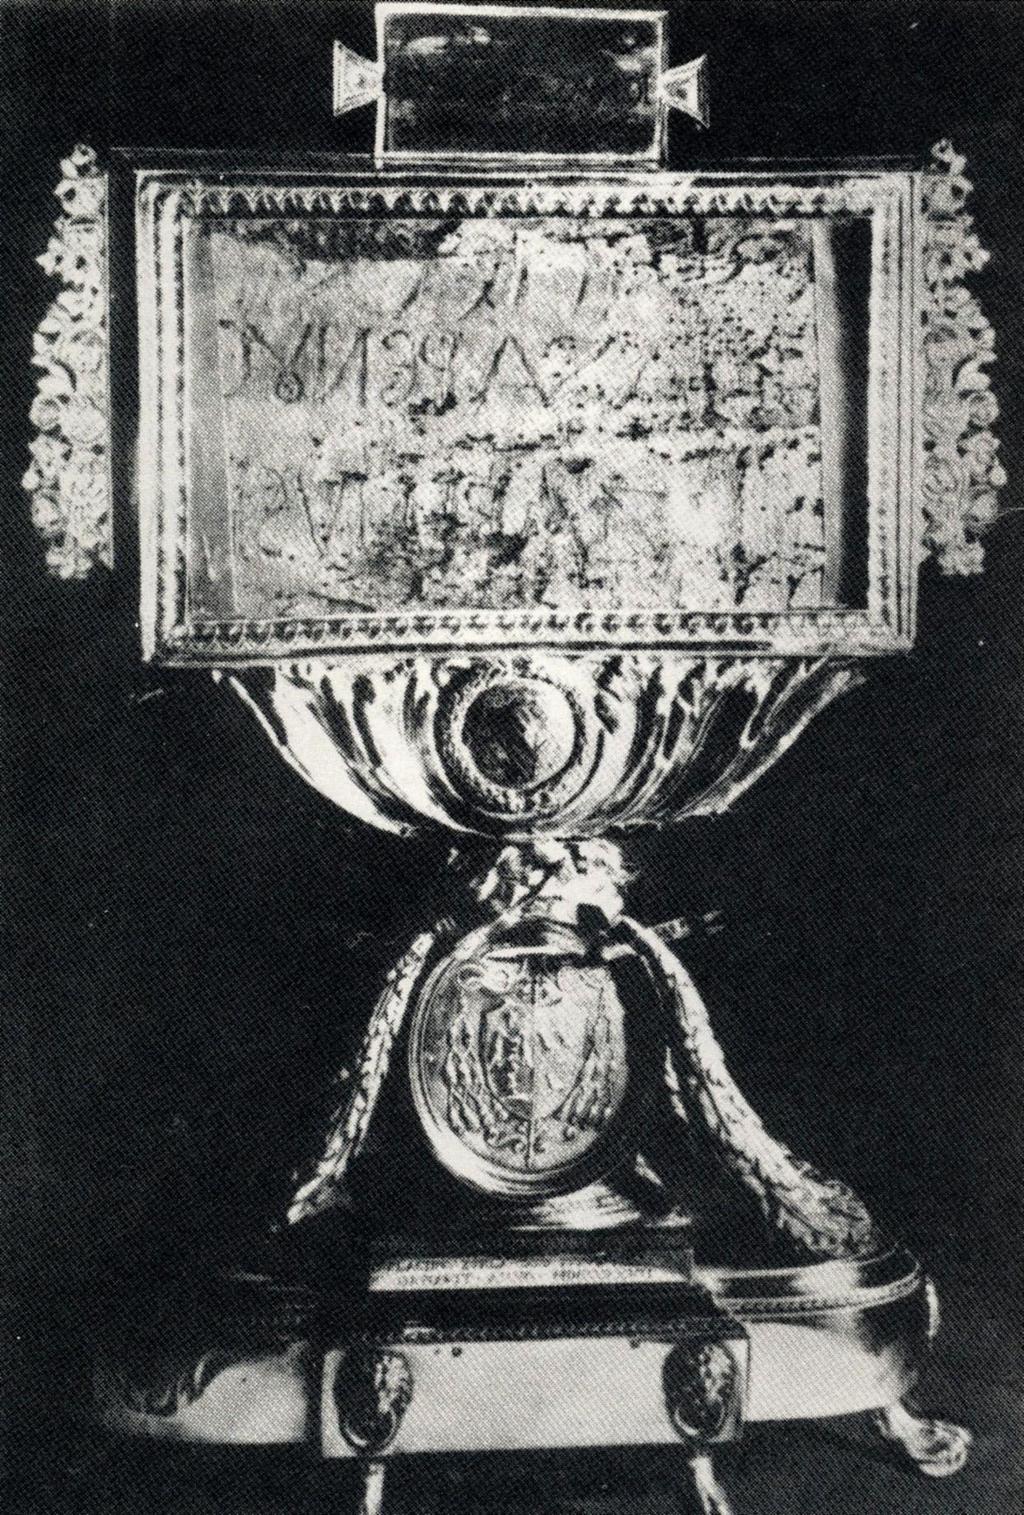 2 Fig. 1: The fragment of the Title of the Cross, behind glass in a silver reliquary.